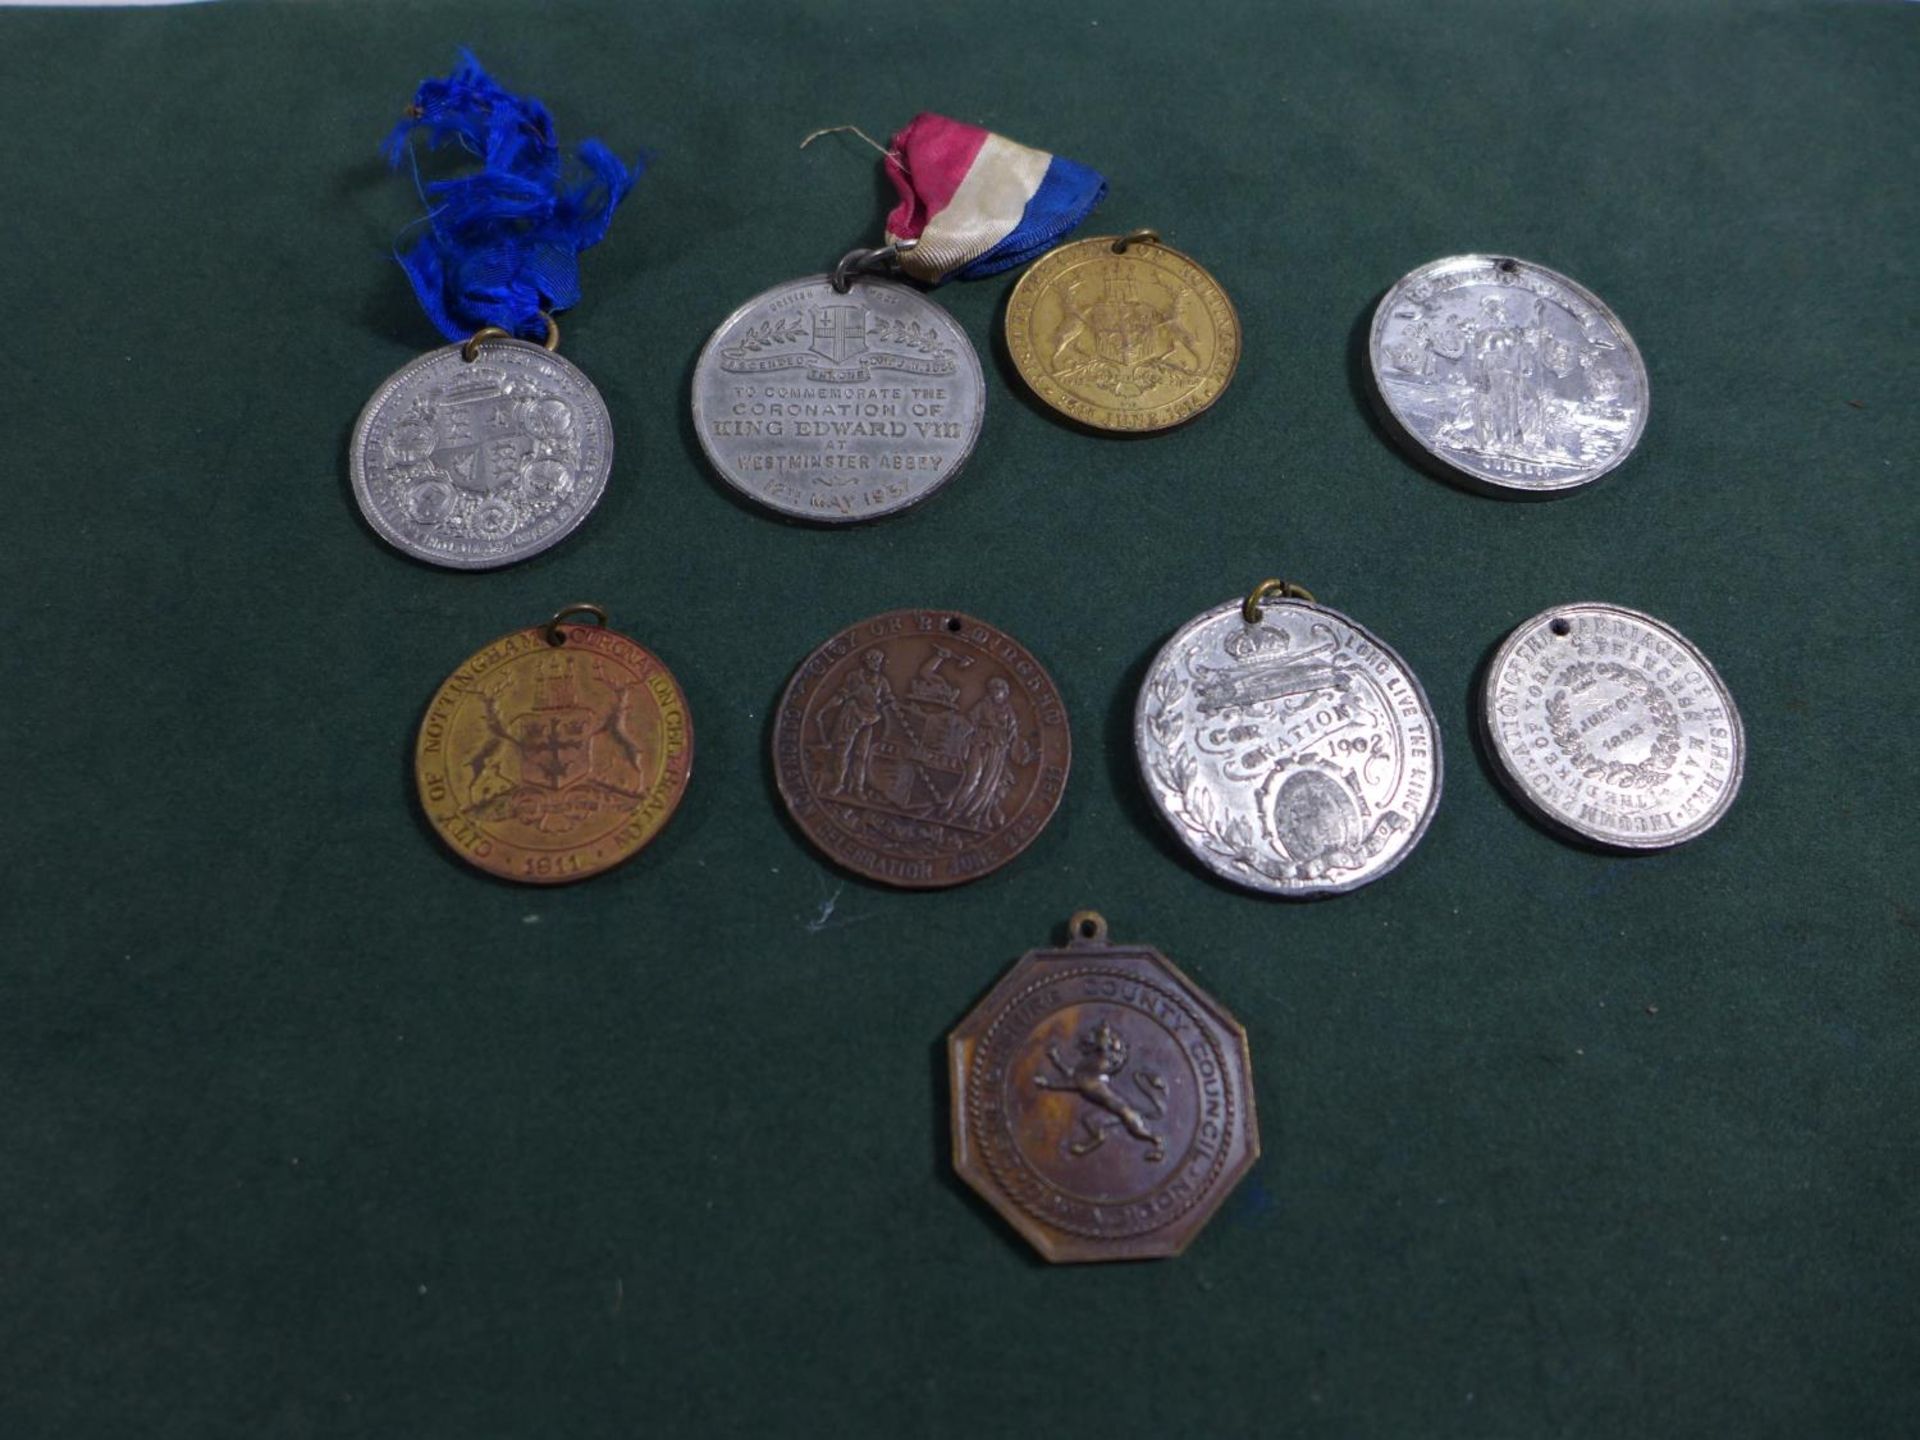 A COLLECTION OF NINE ROYAL FAMILY CORONATION AND JUBILEE MEDALS FROM THE REIGN OF QUEEN VICTORIA - Bild 2 aus 2